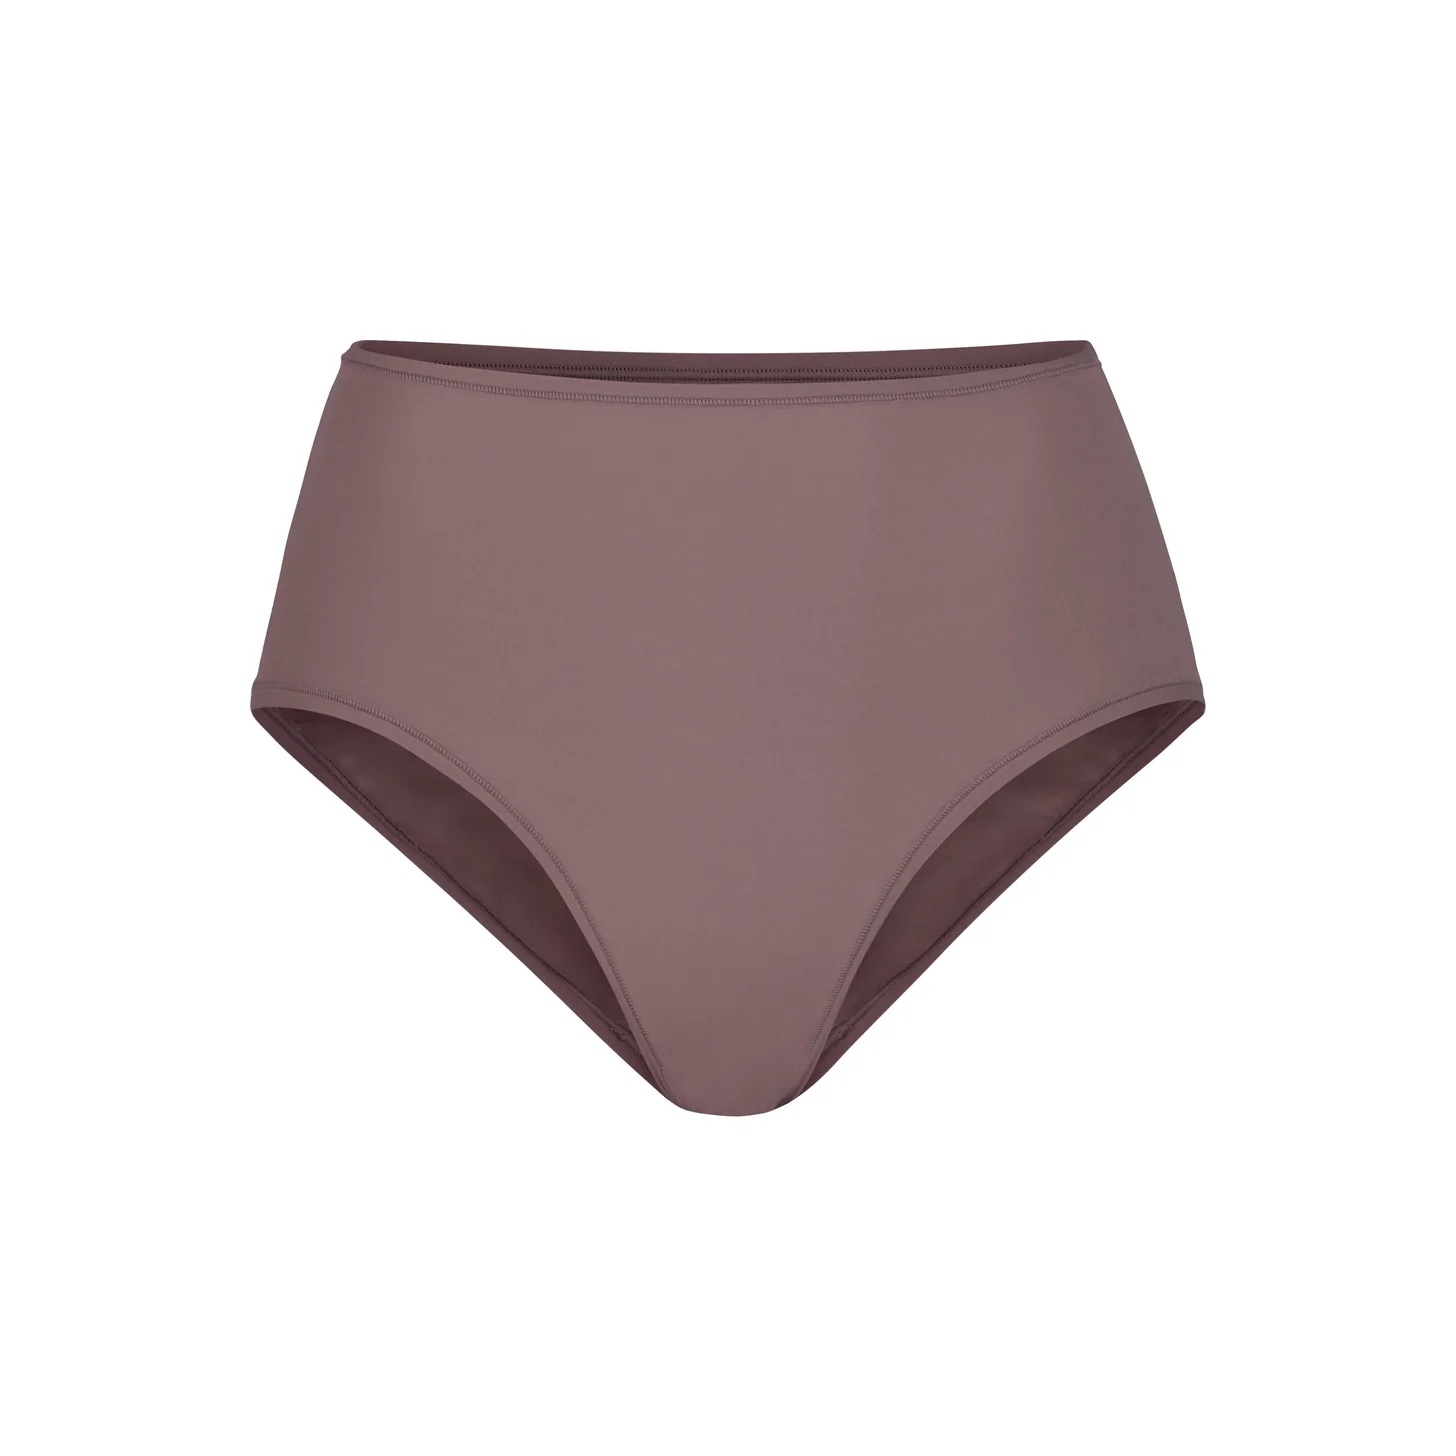 SKIMS Thongs Reivew: The Most Comfortable Thongs Ever - Fly